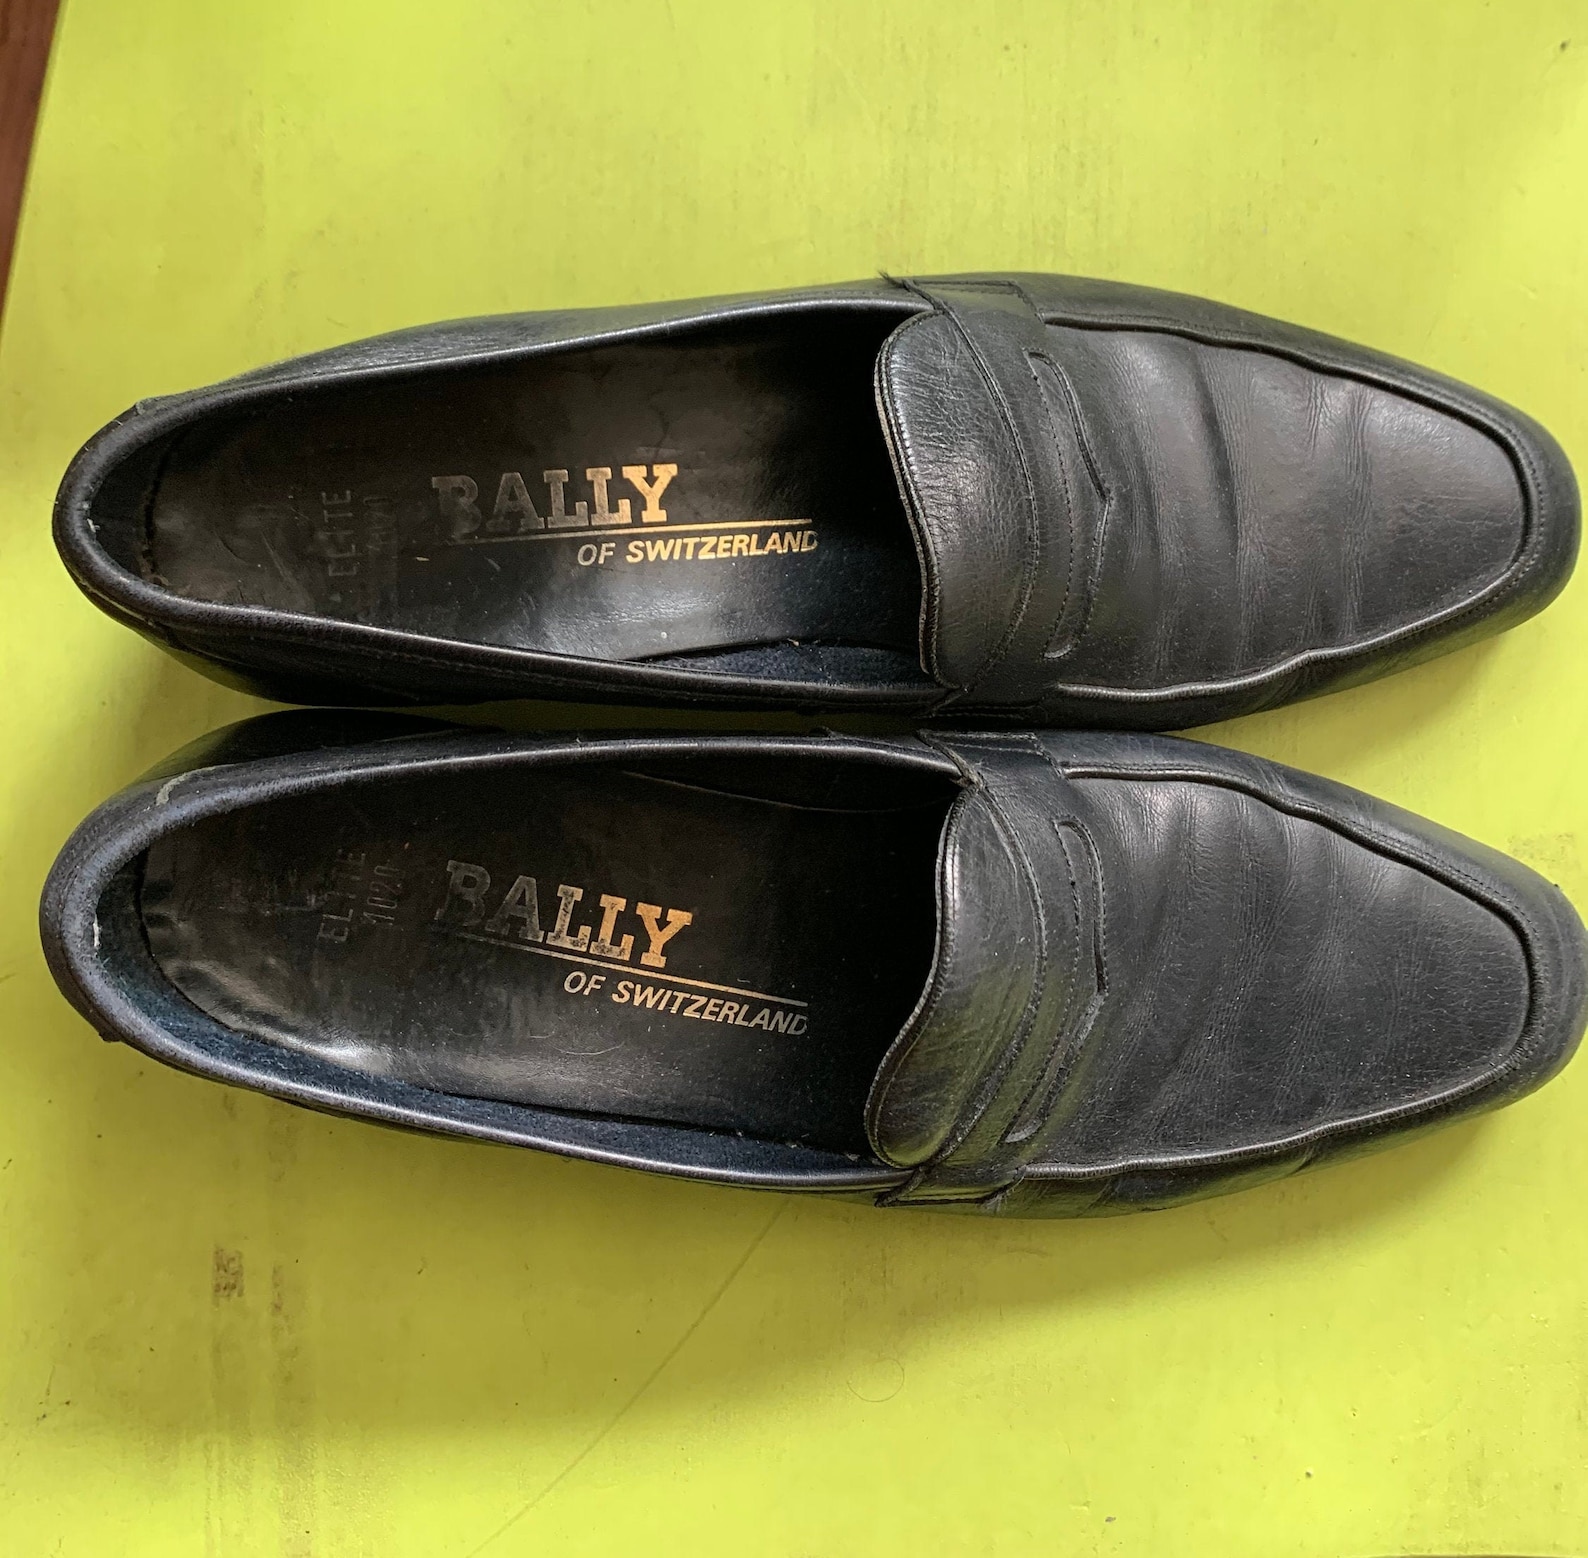 Vintage Bally Loafers | Etsy